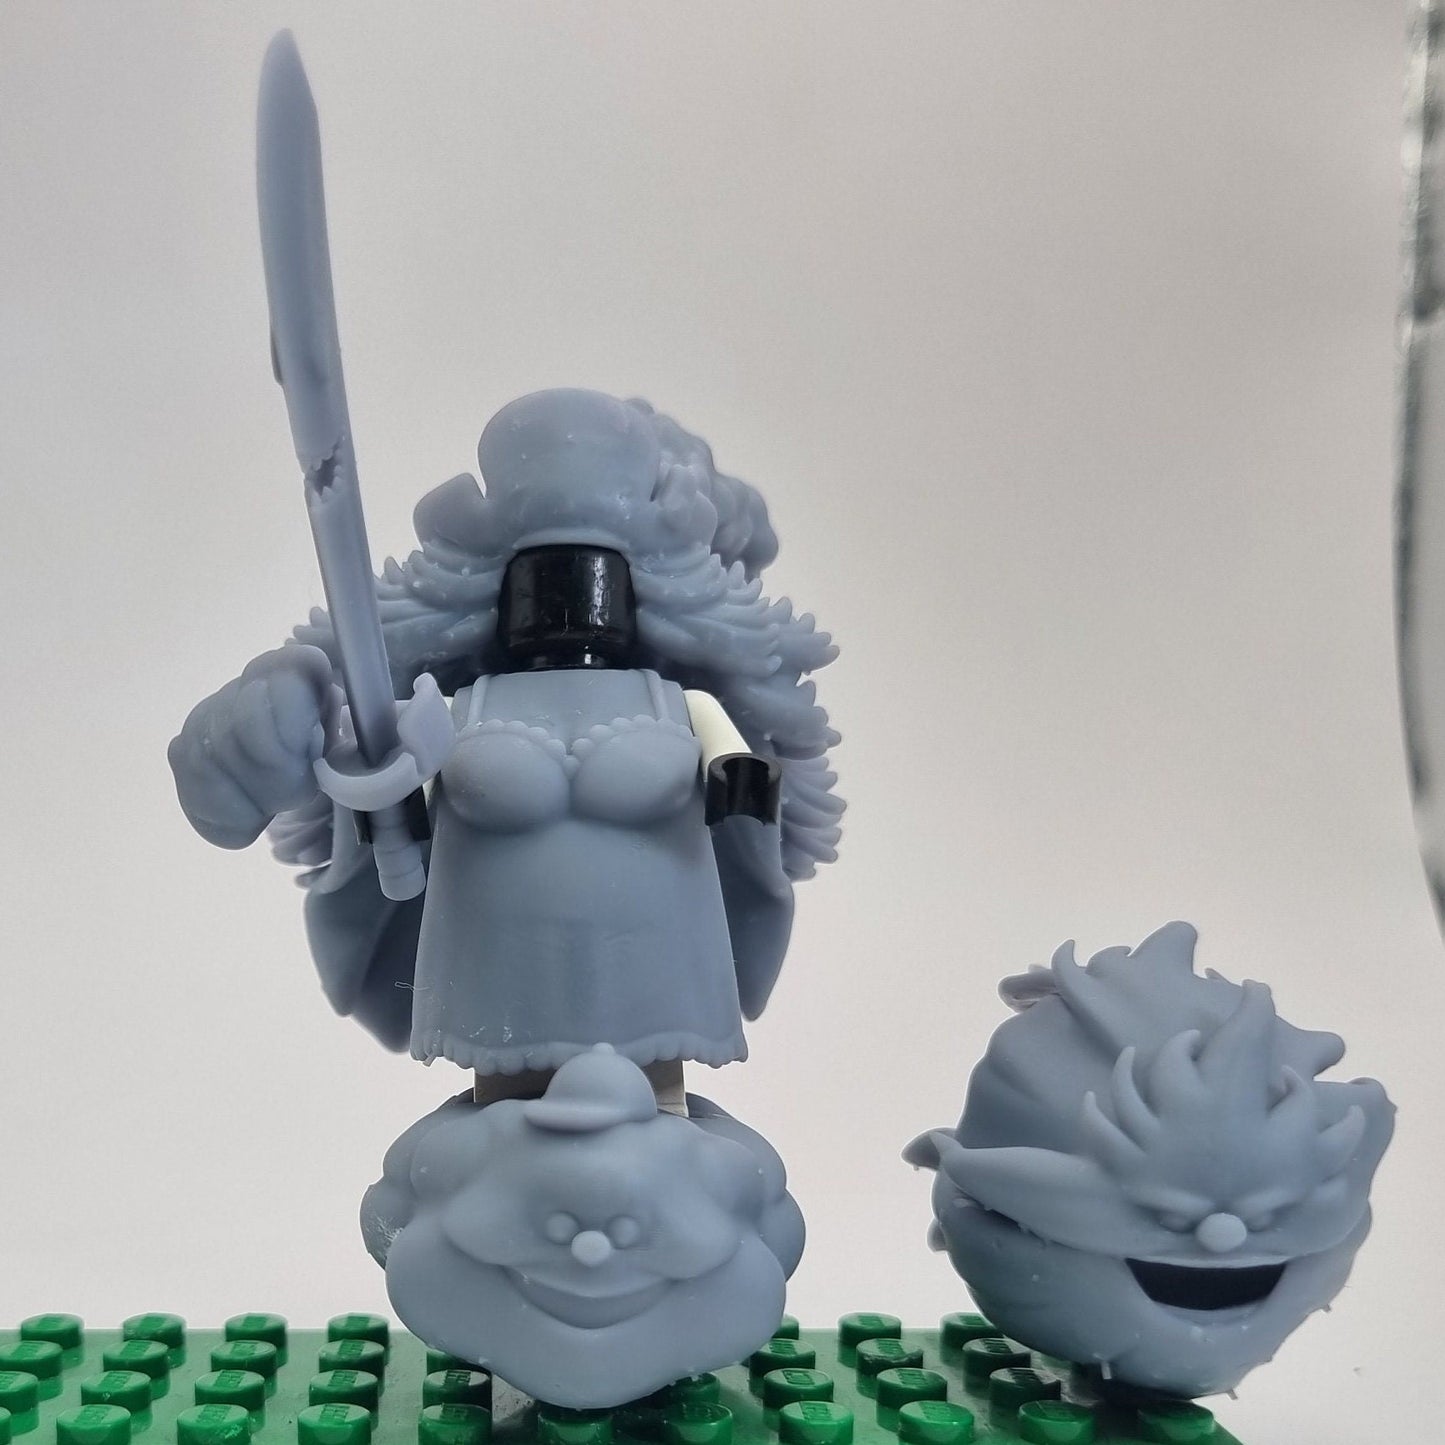 Building toy custom 3D printed momma pirate full set with all hairpieces!!!